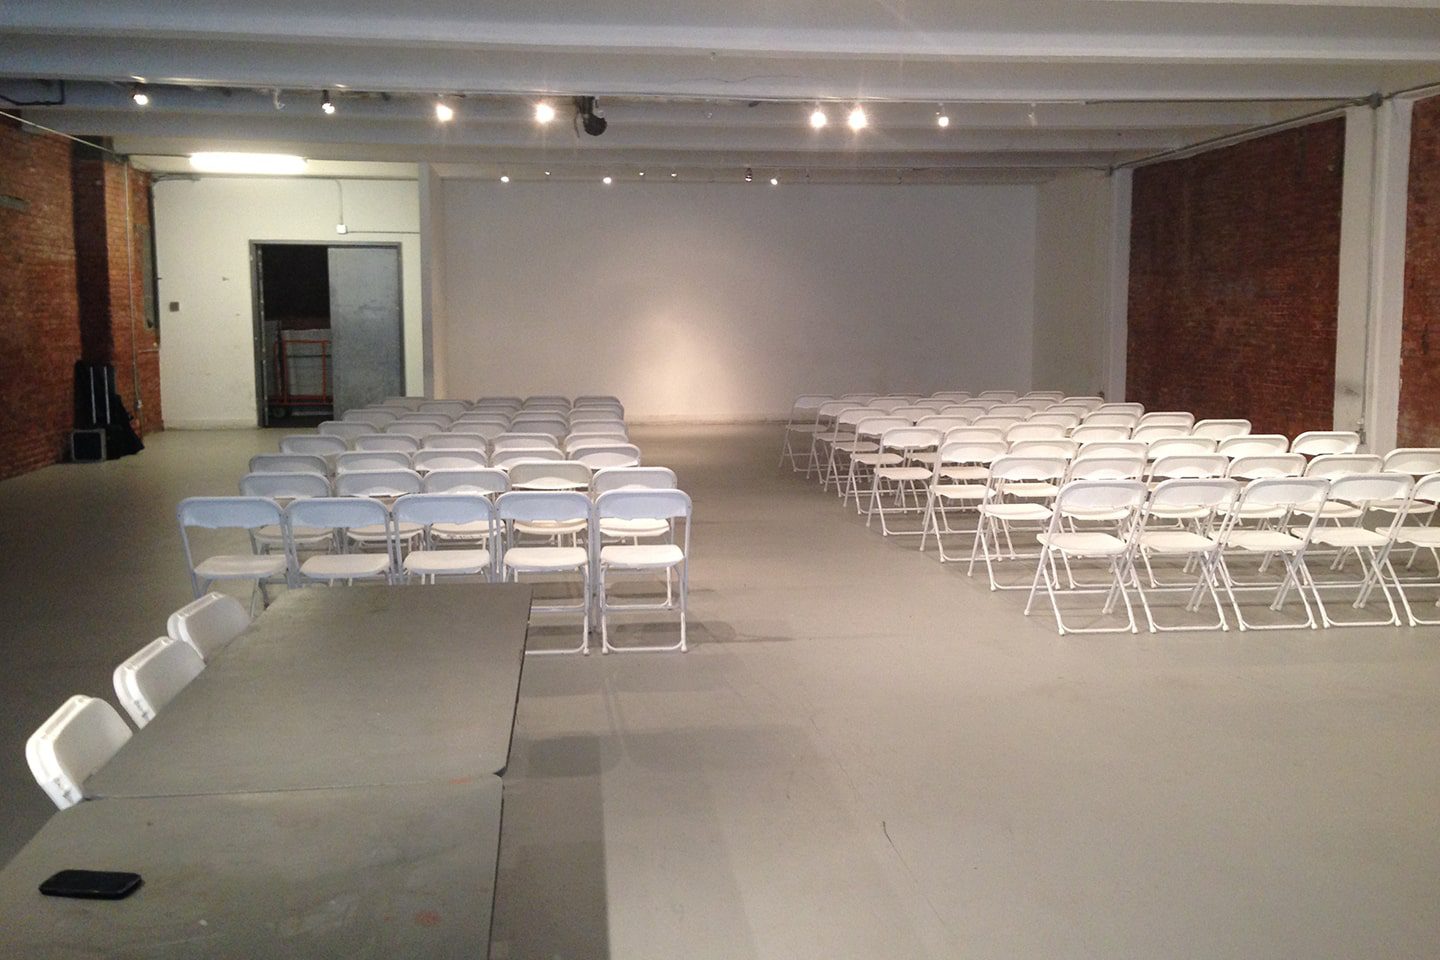 A room with many white chairs and tables